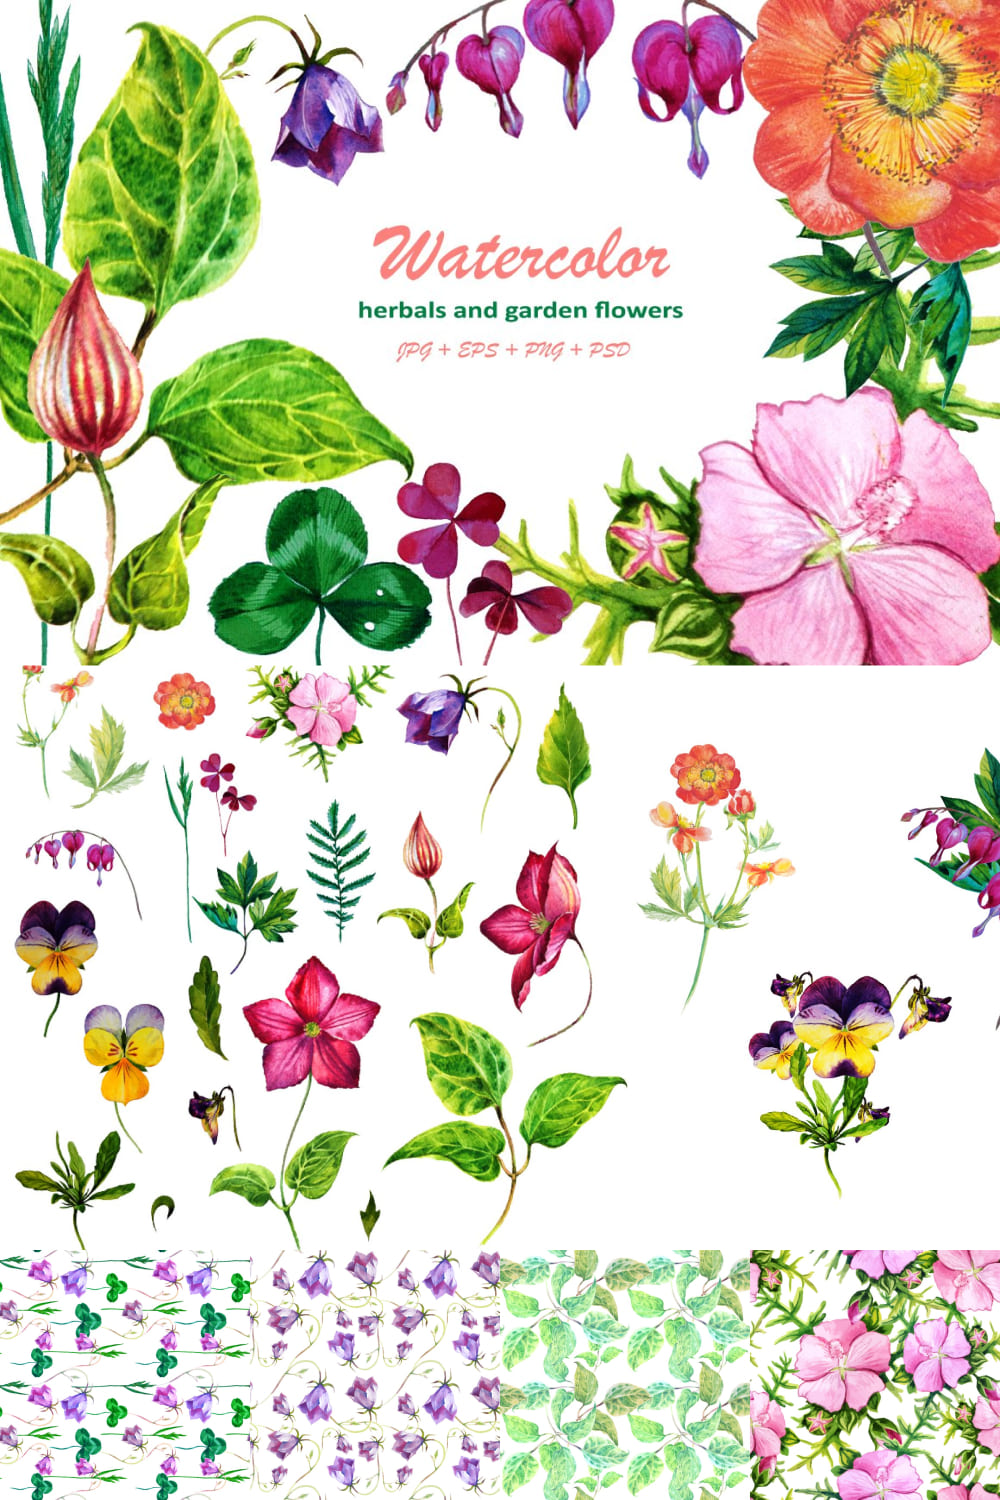 Watercolor Herbals and Flowers pinterest image.